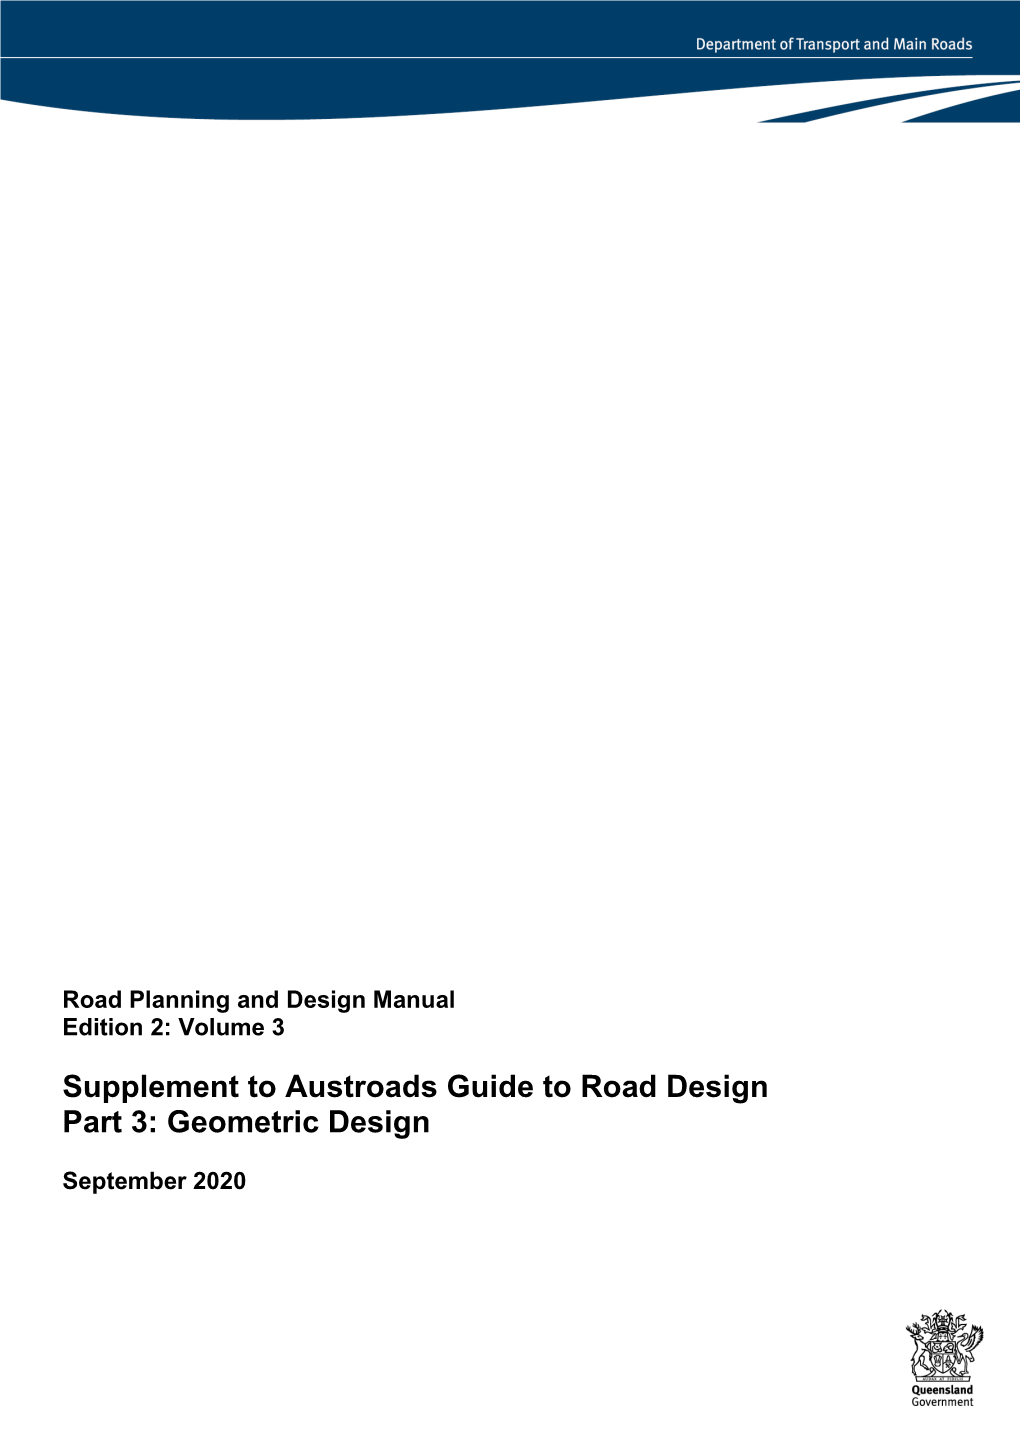 Supplement to Austroads Guide to Road Design Part 3: Geometric Design